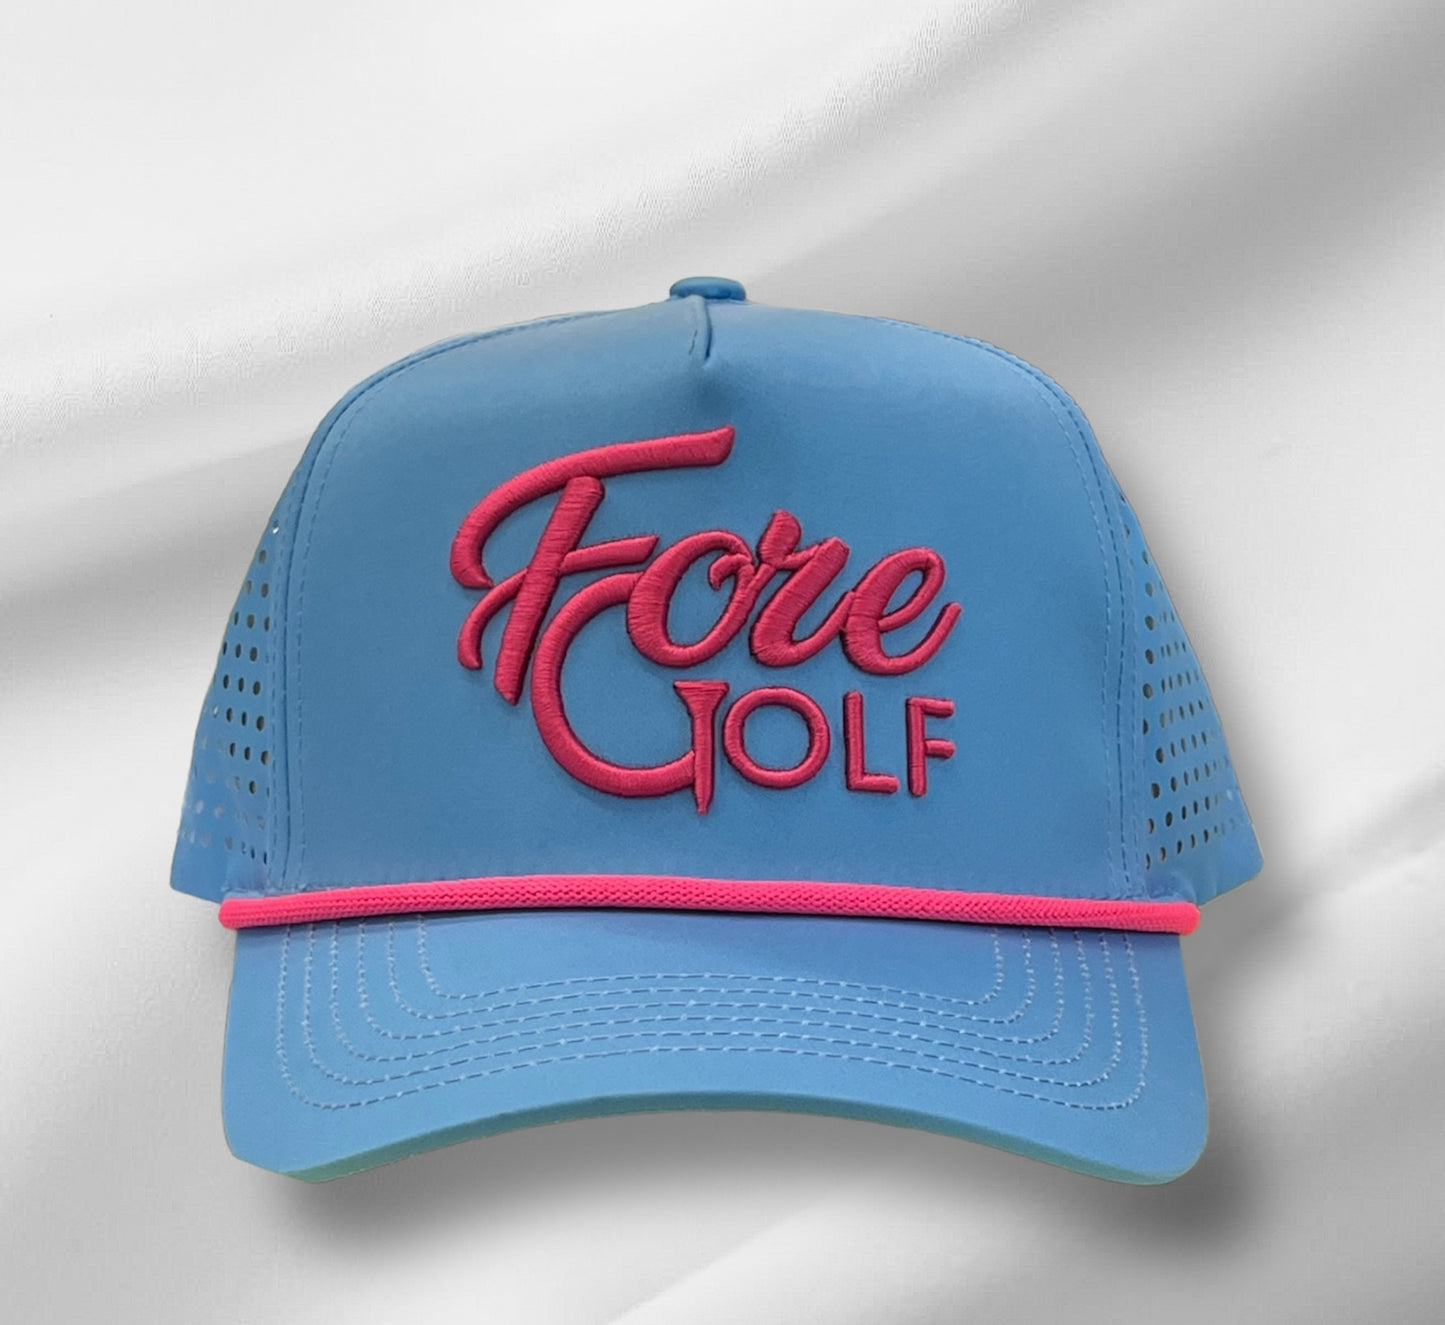 Fore Golf Rope Cap